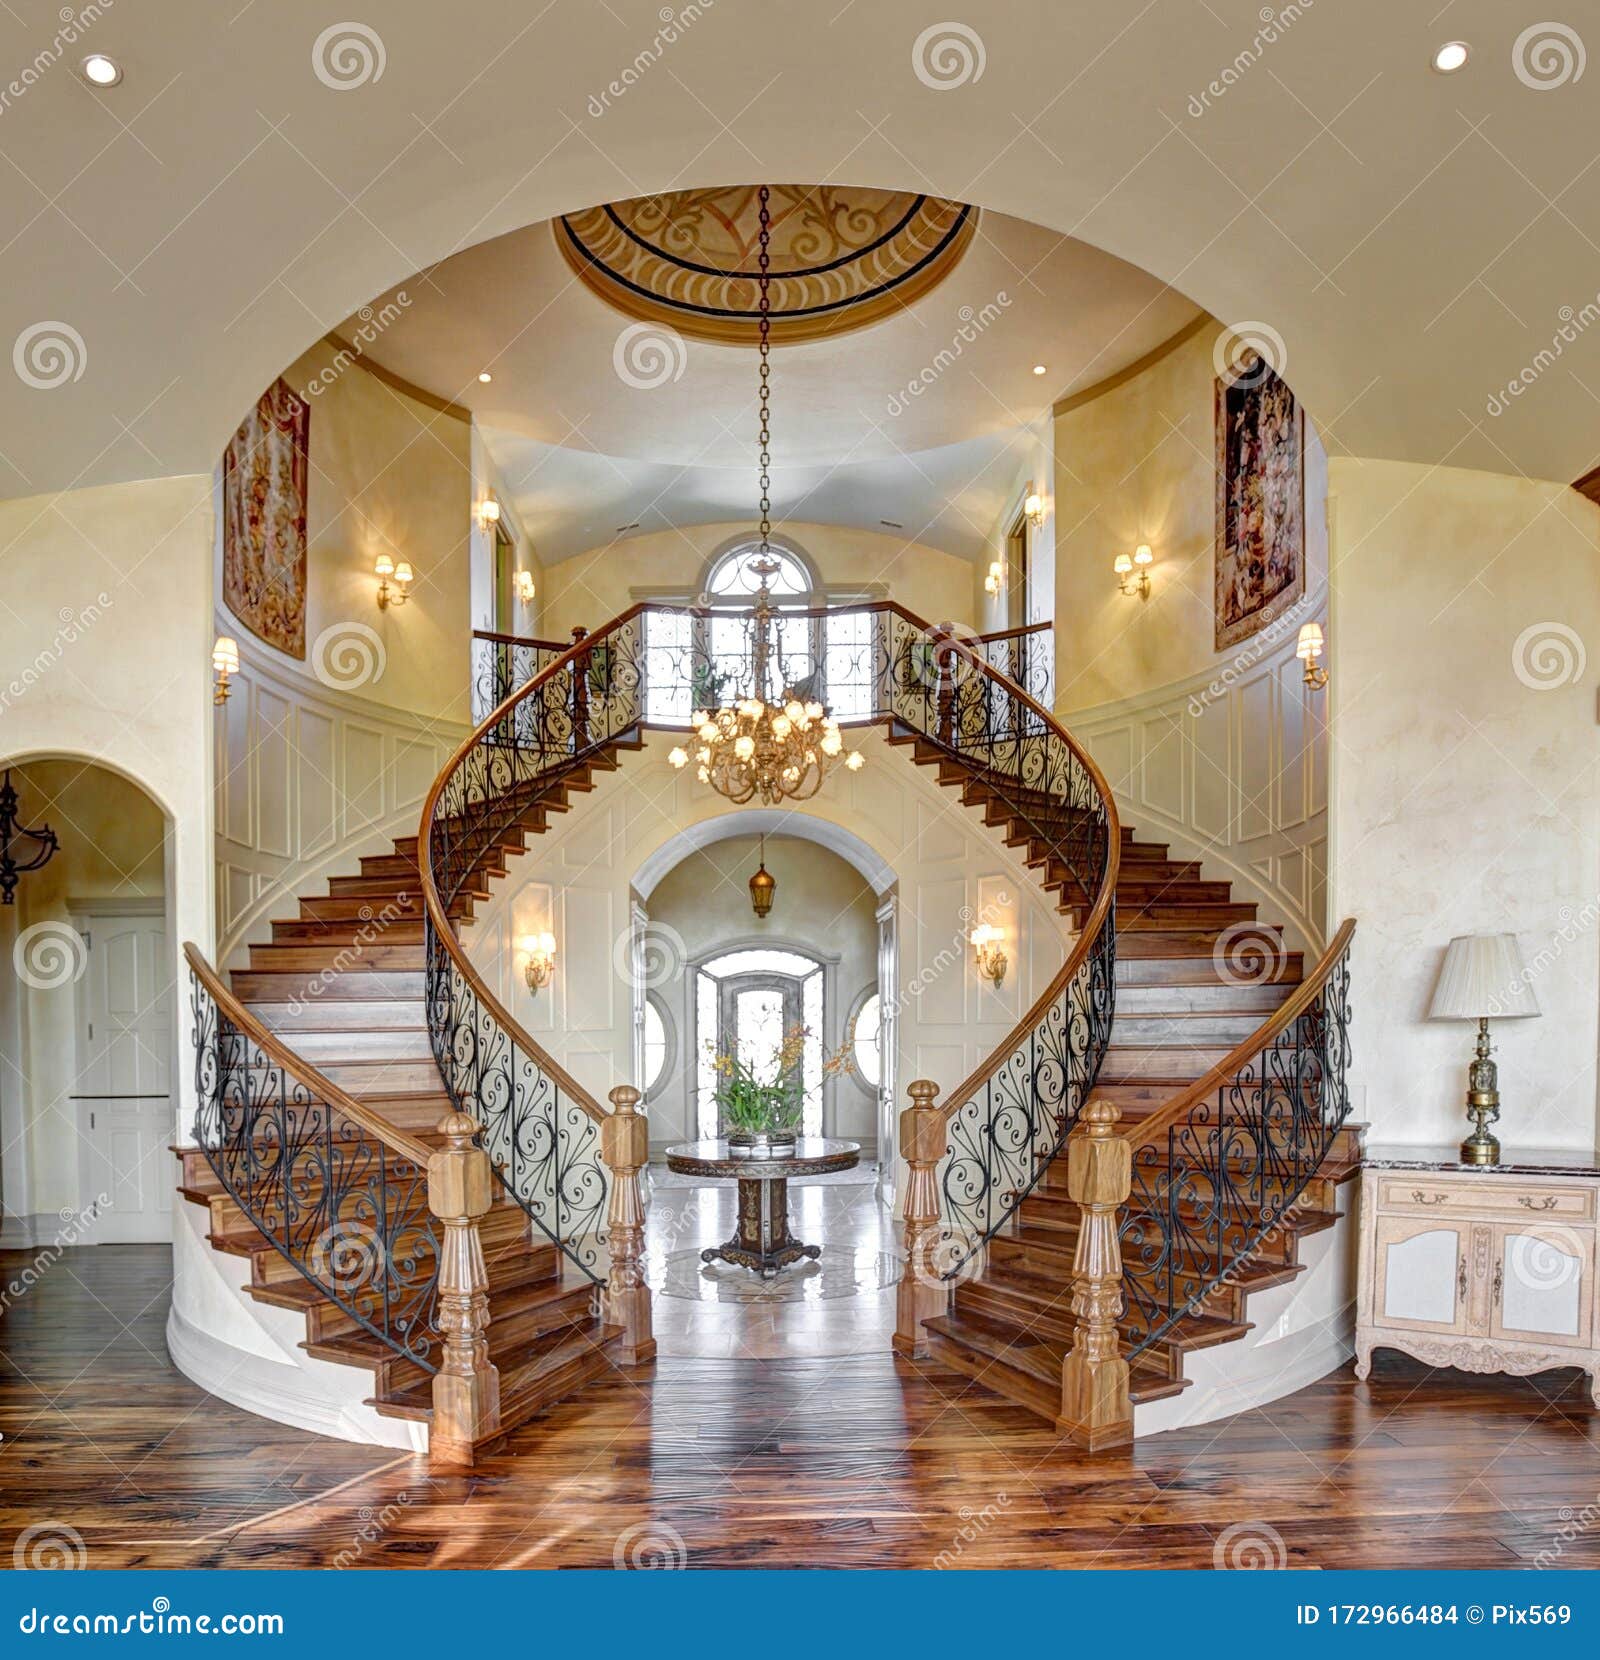 The Curved Dual Grand Staircase in an Upscale Home. Stock Photo - Image of  architectural, entryway: 172966484